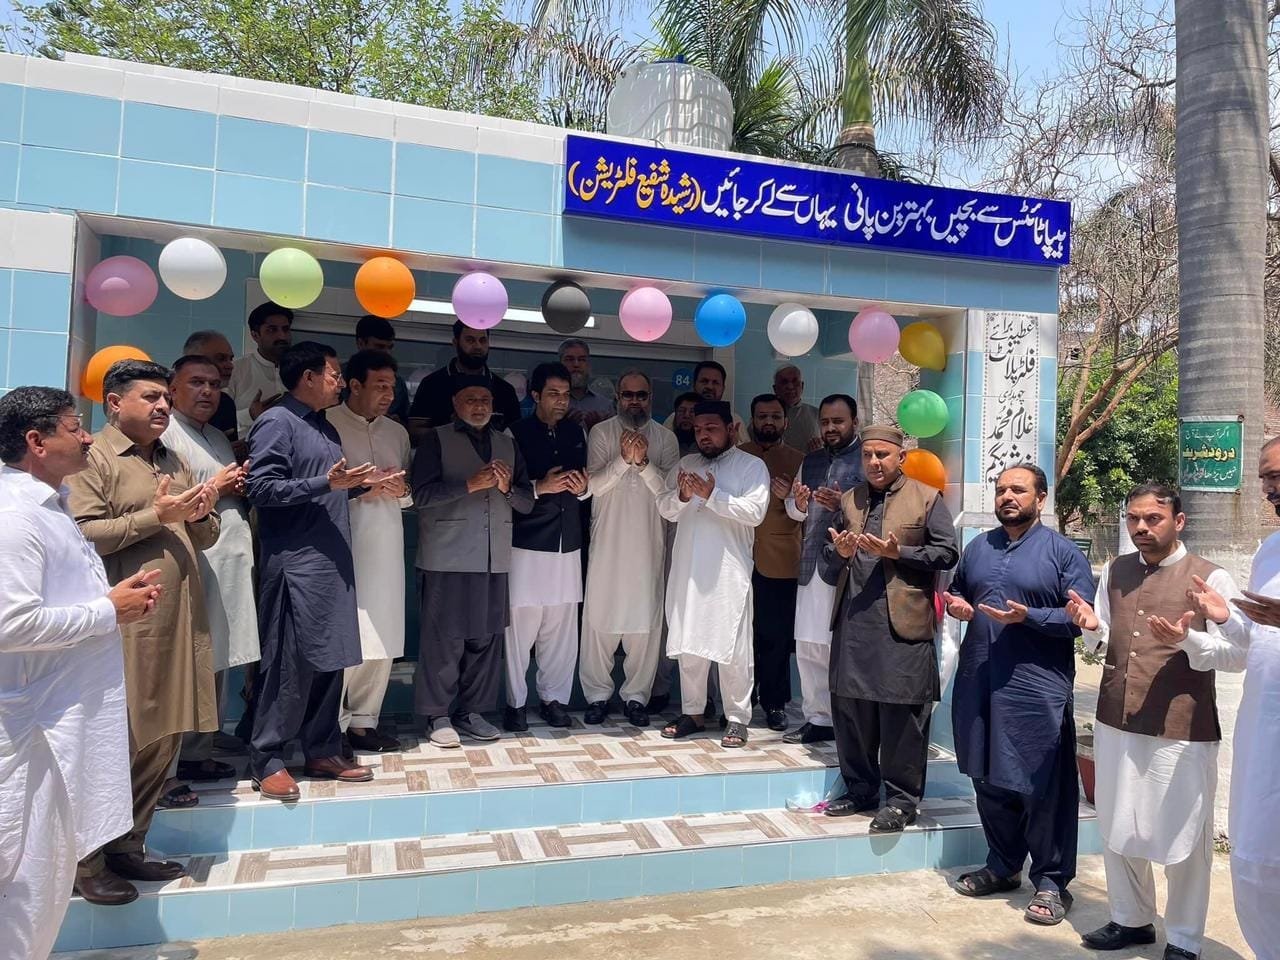 #President Gujrat Chamber of Commerce and Industry Mr. Sikander Ishfaq Razi along with Chaudhry Muhammad Asad Bhatti #Senior_Vice_President, Mr. Muhammad Masoom Qamar #Vice_President, Chaudhry Touseef Abdullah #Executive Member attended the #inauguration_ceremony of 84th Rashida Shafih Water Filtration Plant in Science College Gujrat #President #GtCCI #Gujrat #SVP #VP